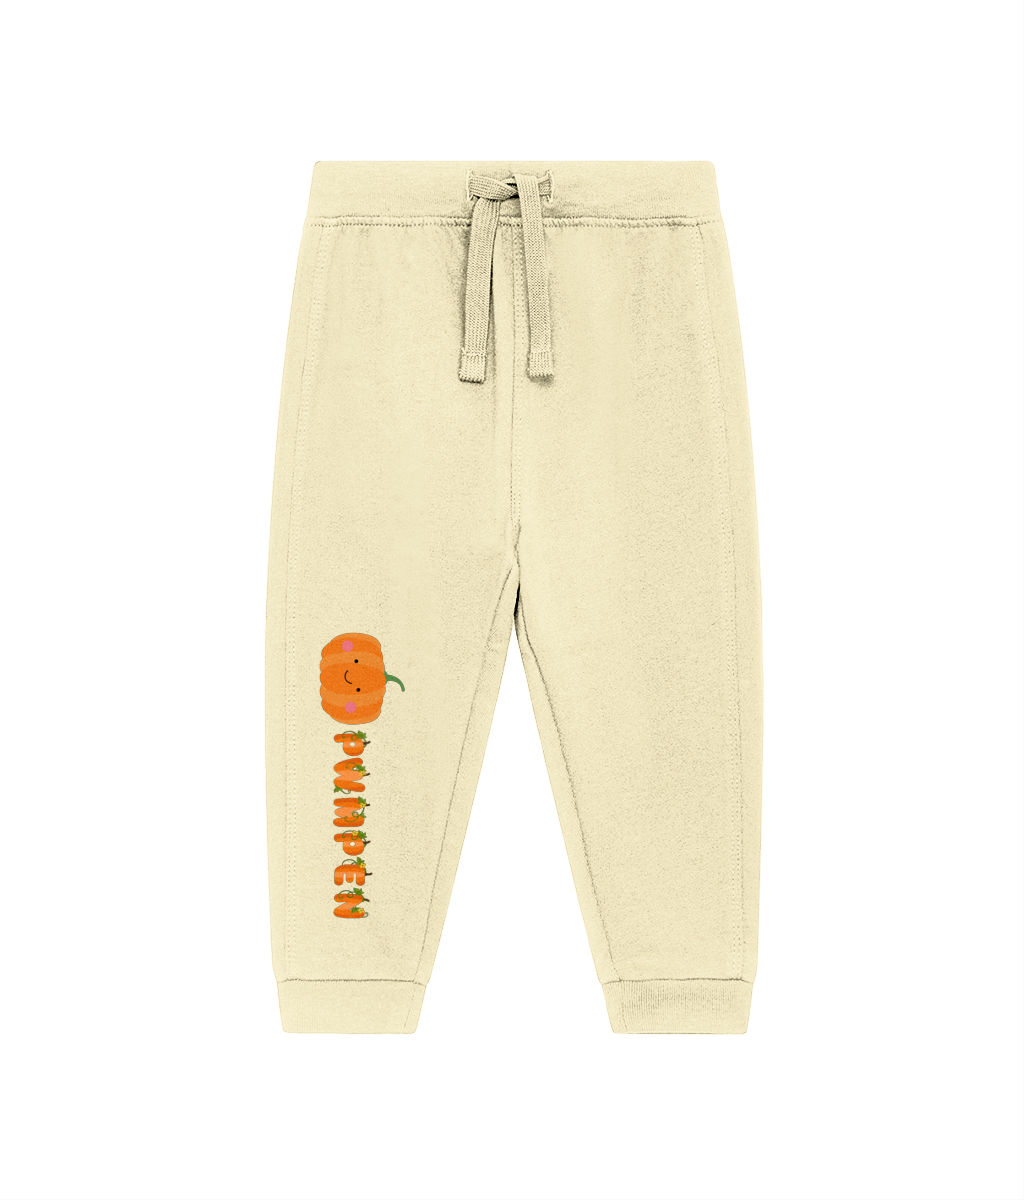 Pwmpen Baby Jog Pants | Welsh Baby Clothes